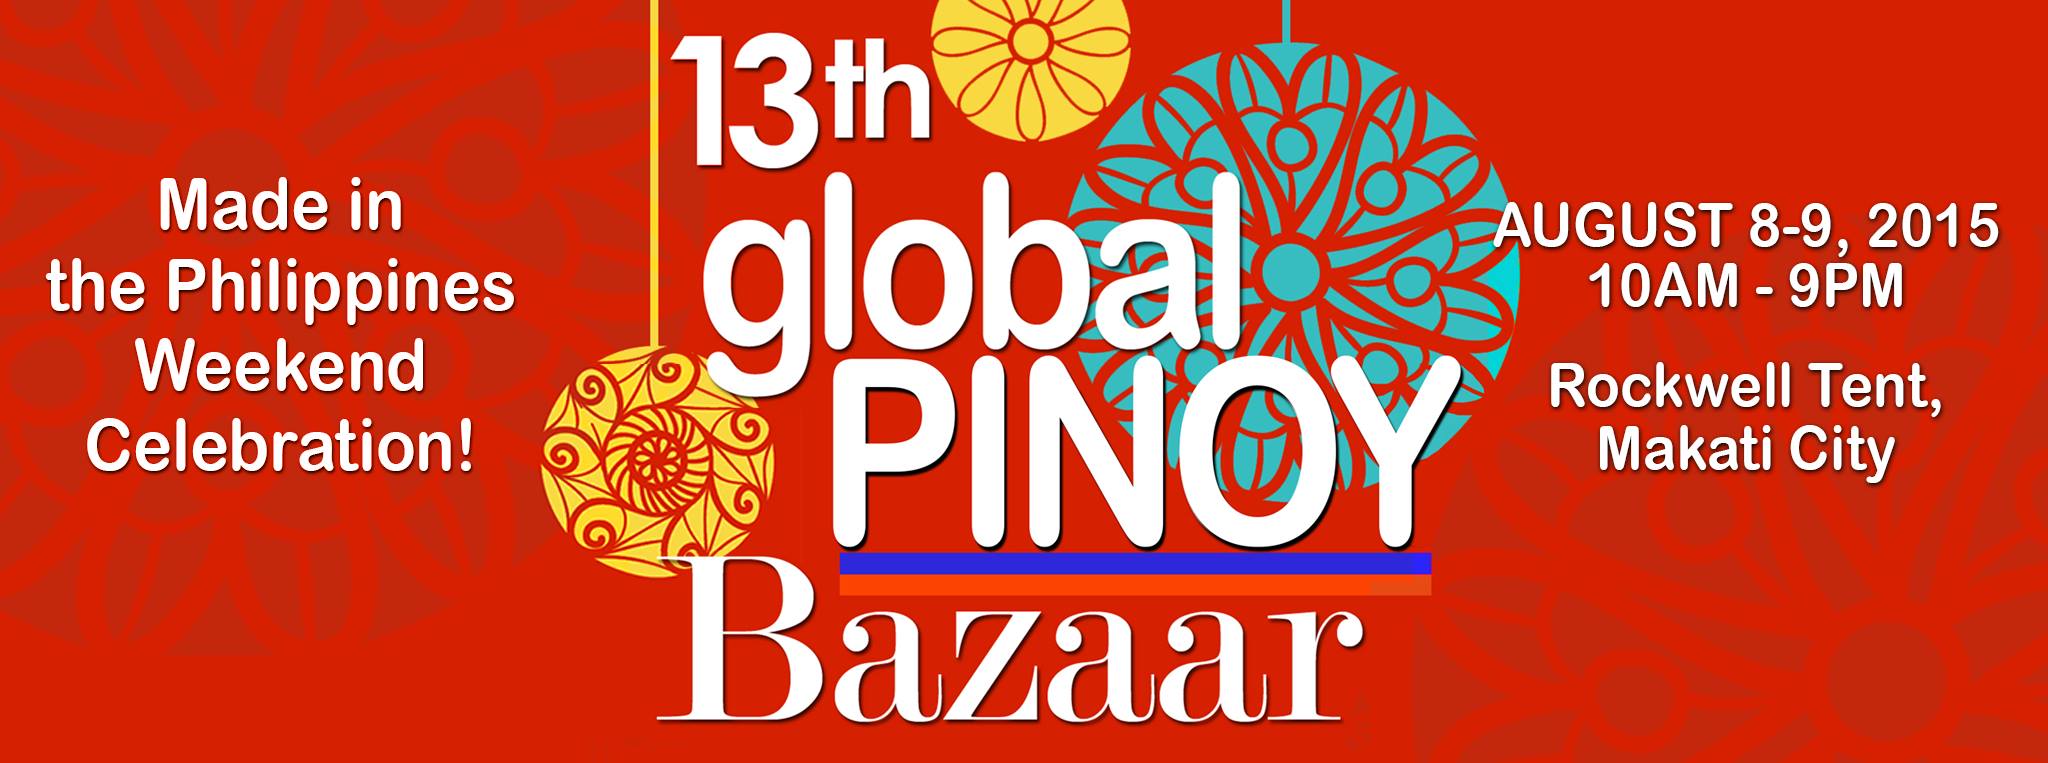 13th Global Pinoy Bazaar @ Rockwell Tent August 2015